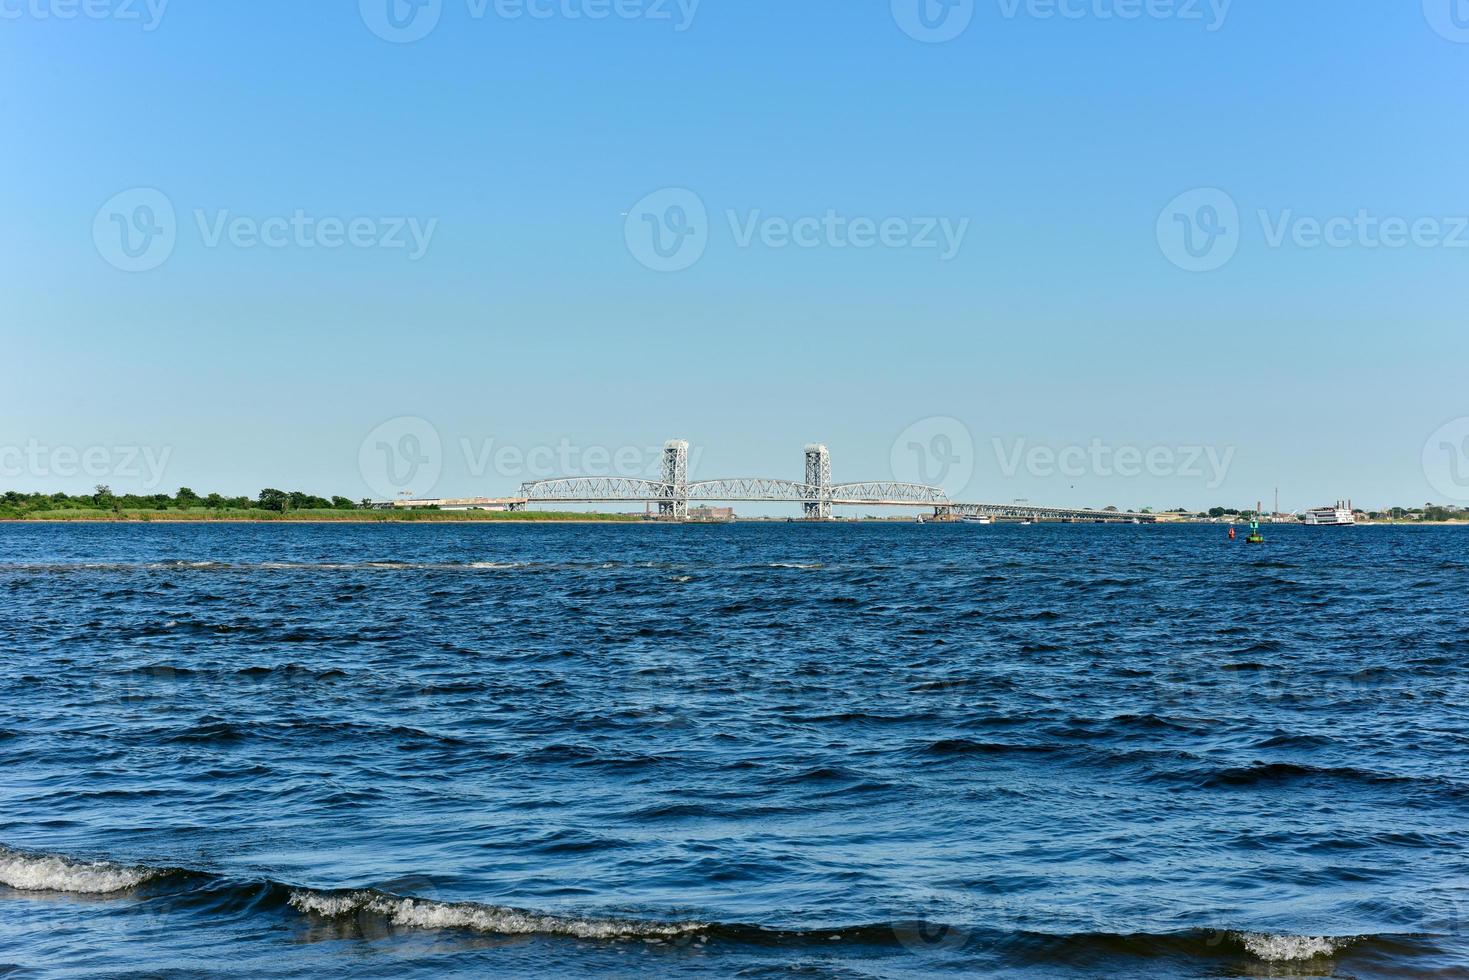 Marine Parkway-Gil Hodges Memorial Bridge as seen from Brooklyn, New York. Built and opened by the Marine Parkway Authority in 1937, it was the longest vertical-lift span in the world for automobiles. photo